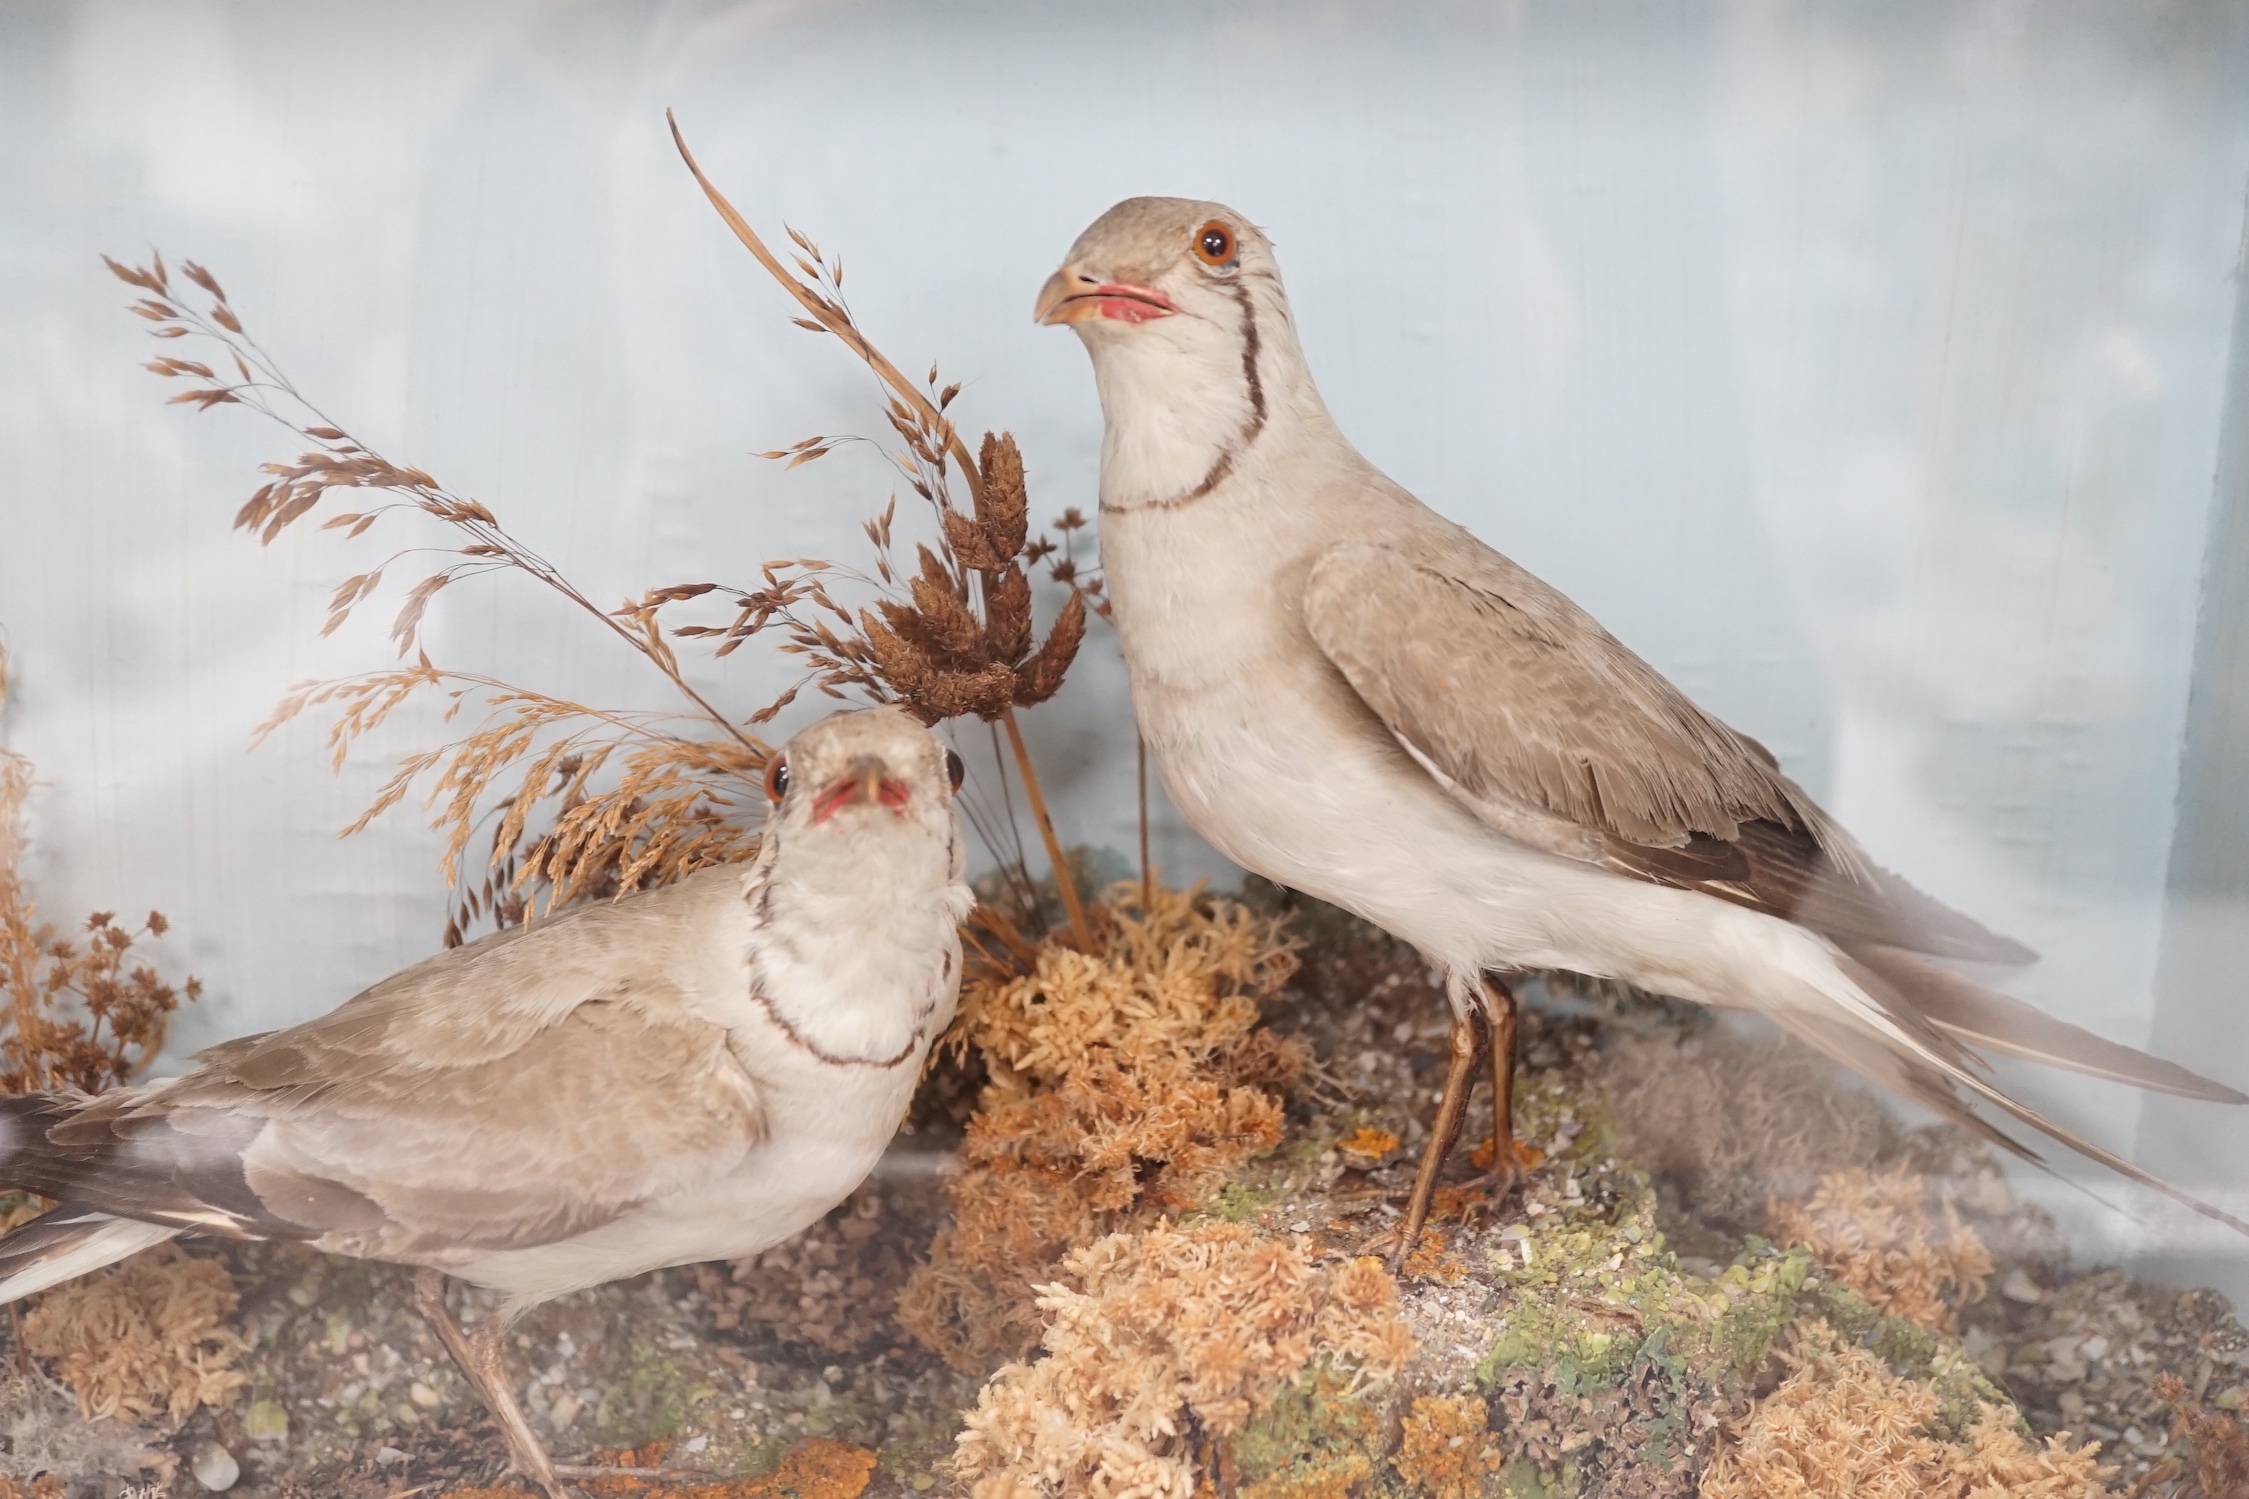 A pair of taxidermy standing Collared Pratincoles in glazed wooden case by T.M. Williams of Oxford St. - 33.5 x 43.5cm